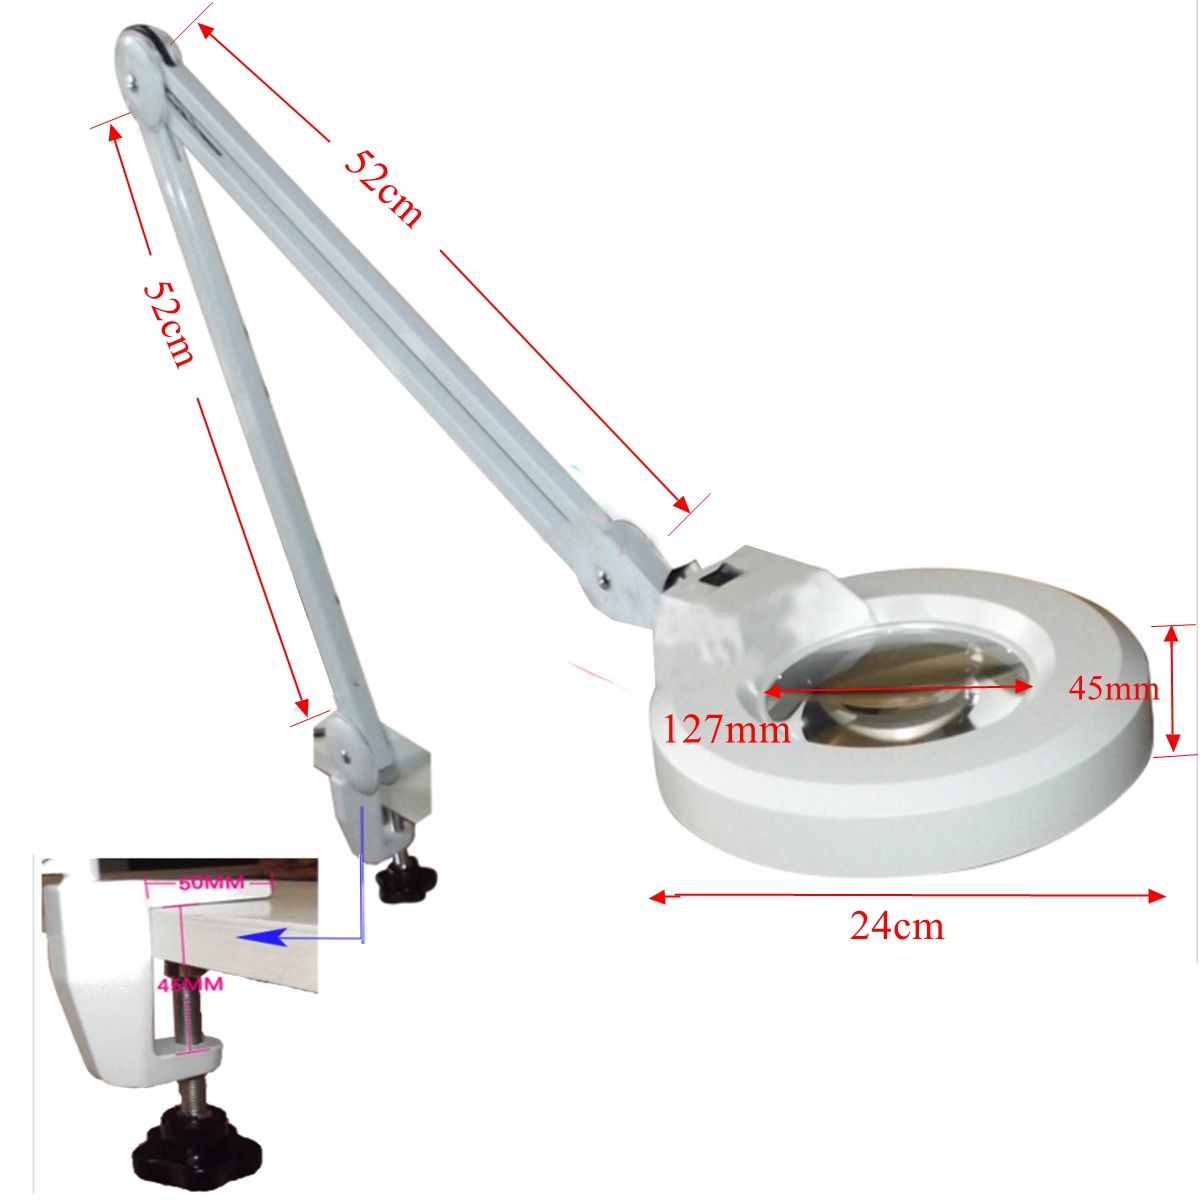 5X127mm-Magnifying-Lamp-LED-5-Inch-SMD-Diopter-Magnifier-Desk-Table-Light-White-1400034